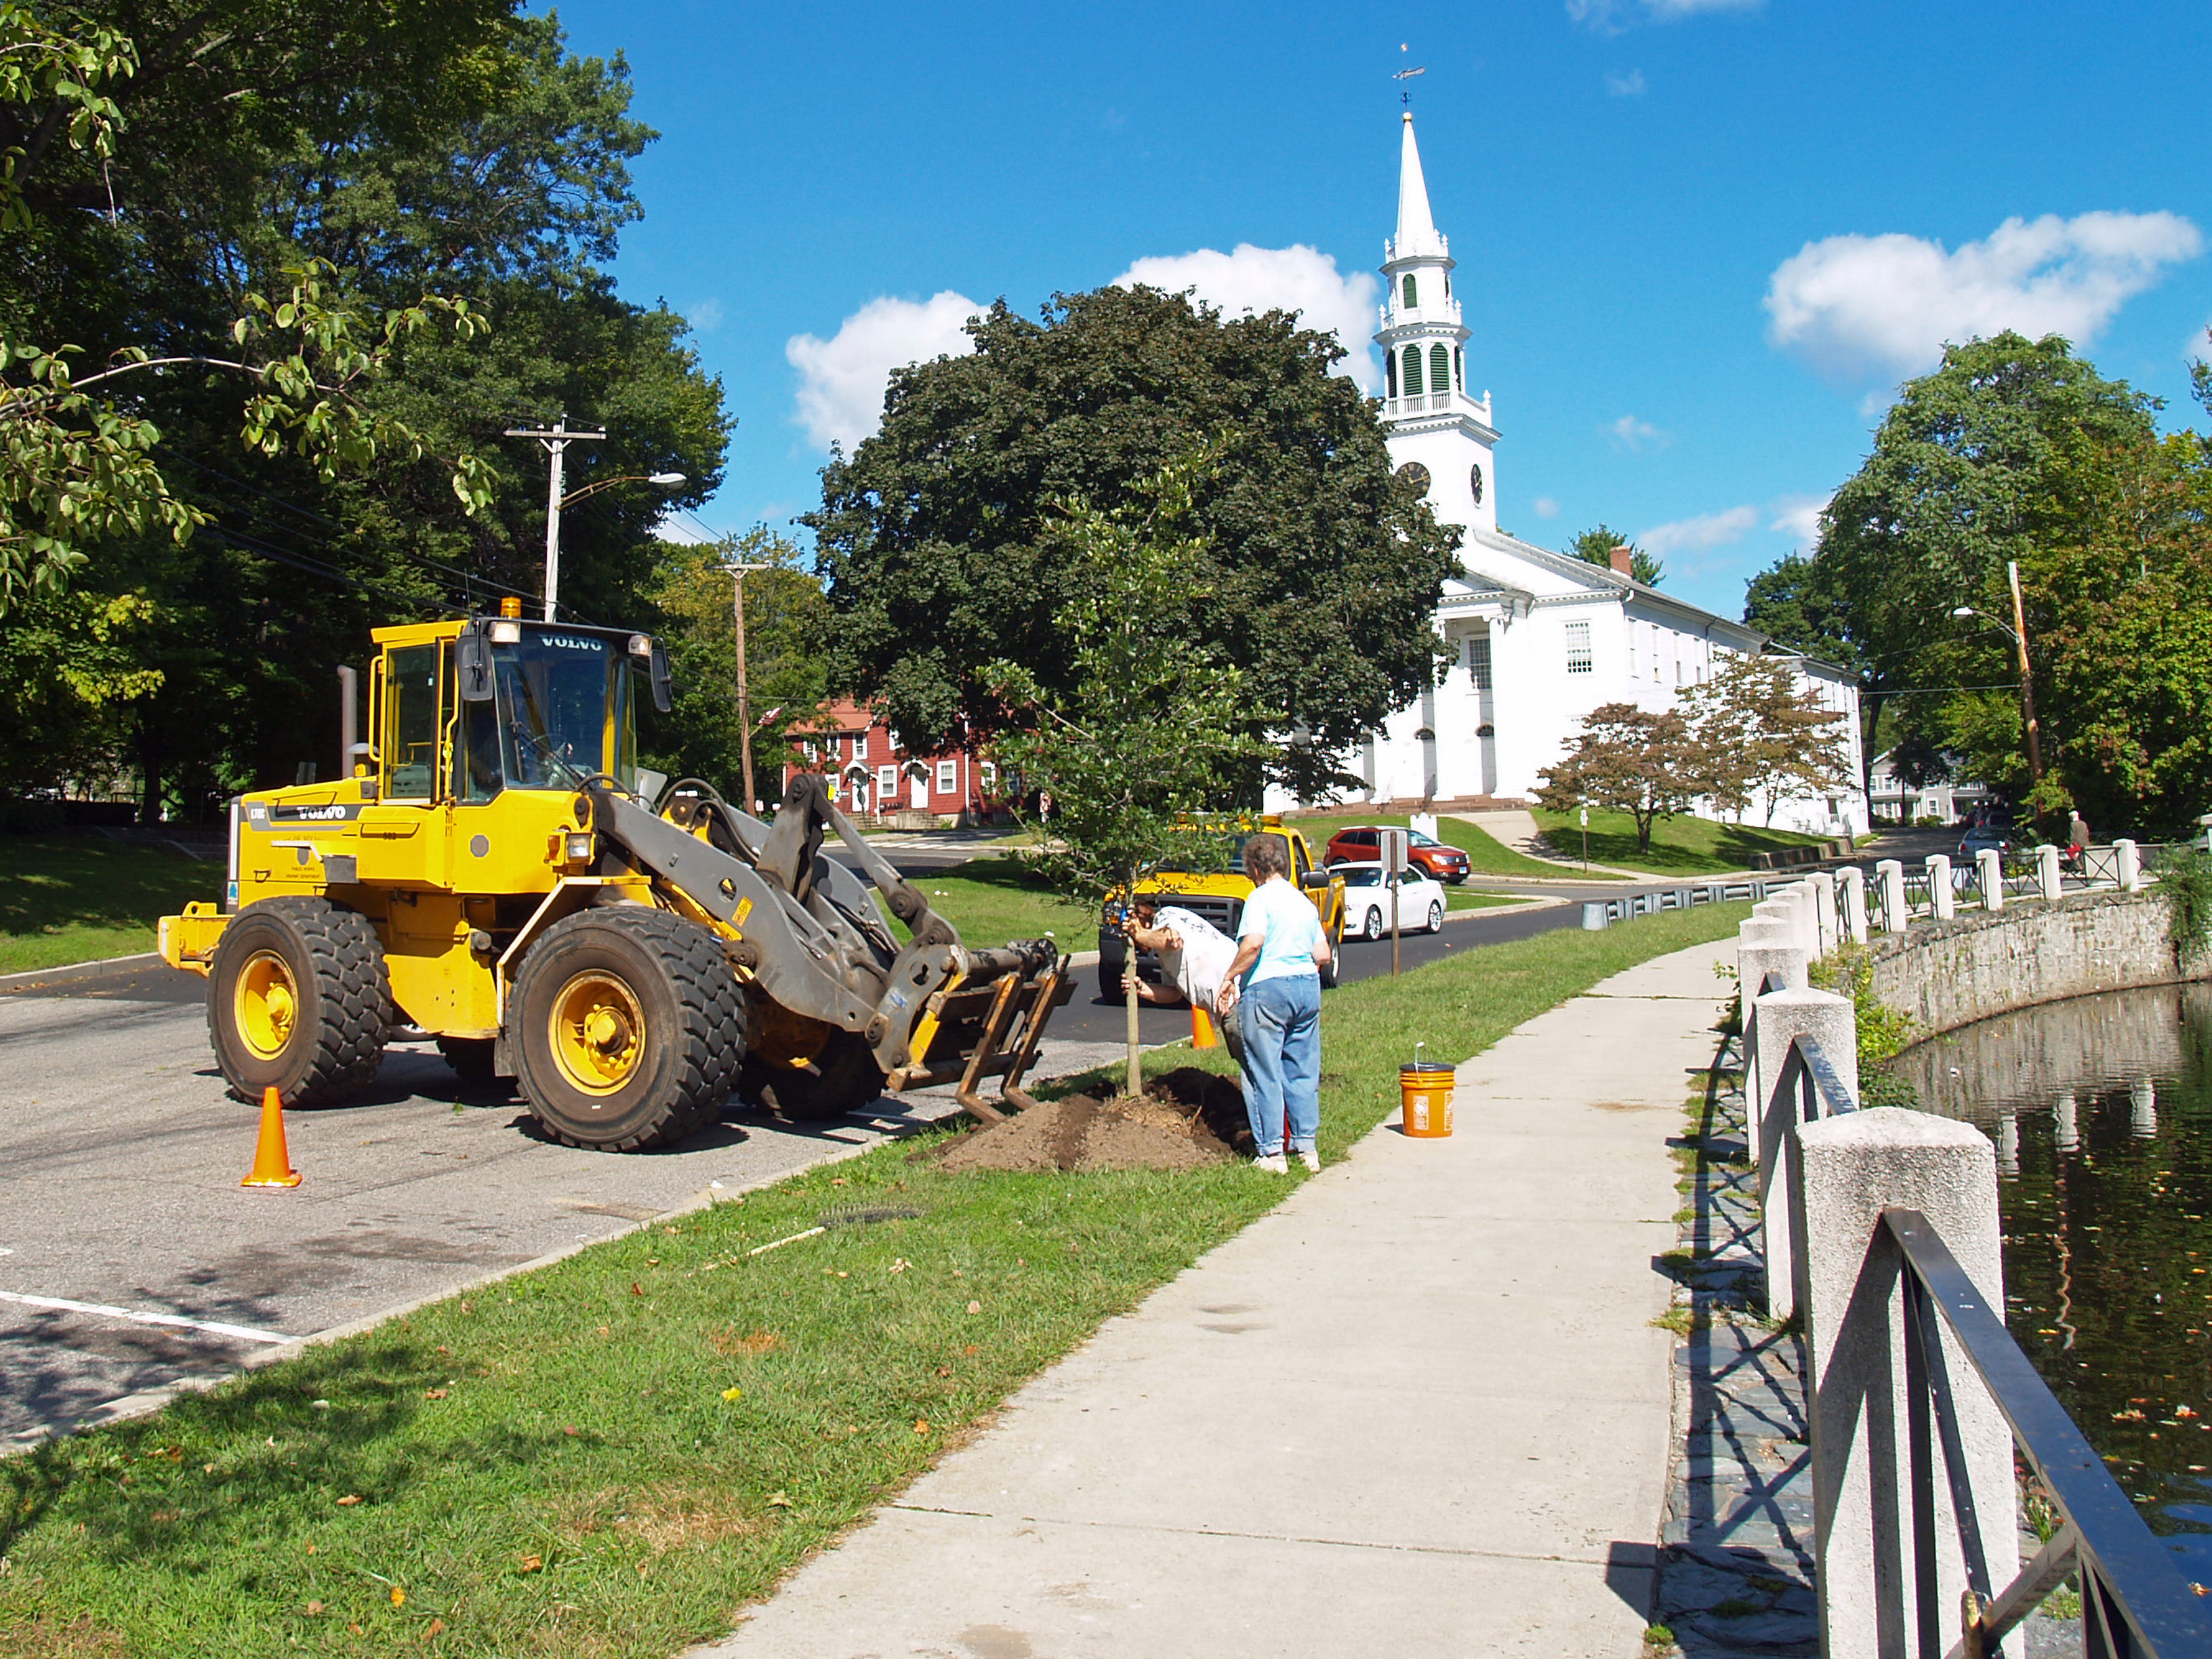 New tree being planted near the Upper Duck Pond in Milford